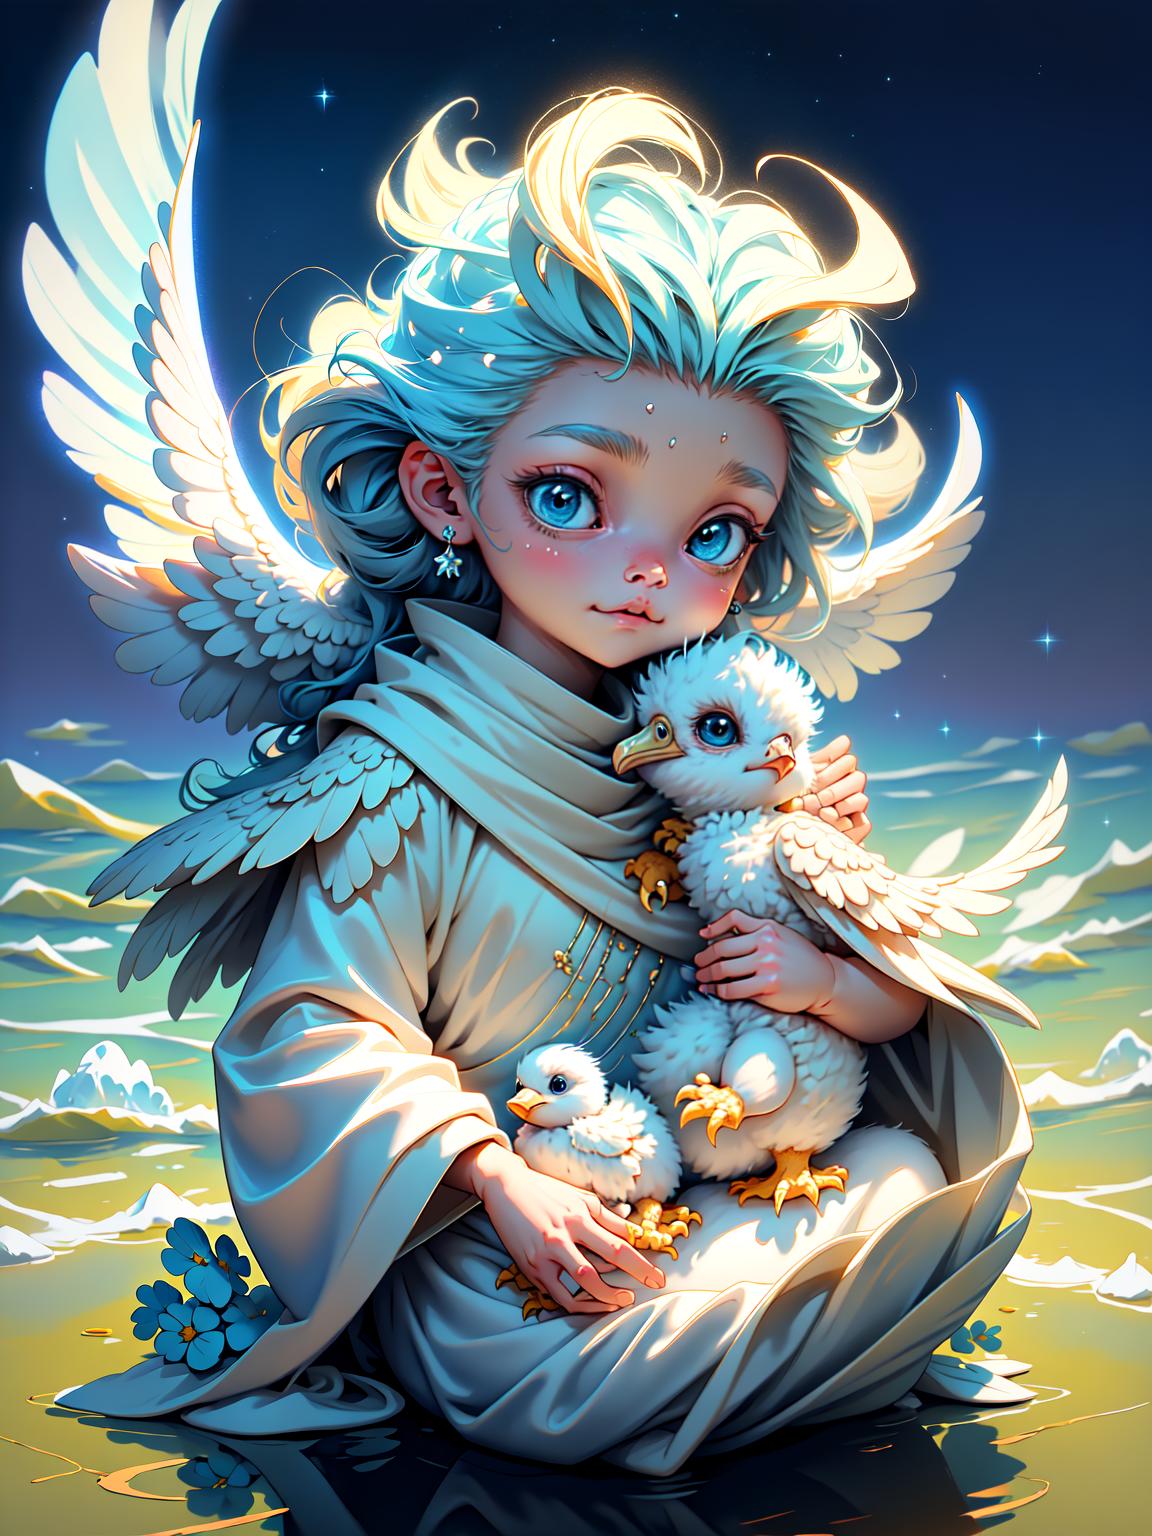  master piece, best quality, ultra detailed, highres, 4k.8k, Pelican, Carrying a baby in its beak, Gentle, BREAK Pelican carrying a baby, Angelic and gentle space., Blue sky with fluffy white clouds, Baby blanket, pacifier, small toys, BREAK Serene and peaceful, Soft light, a warm aura surrounding the characters, Cu73Cre4ture